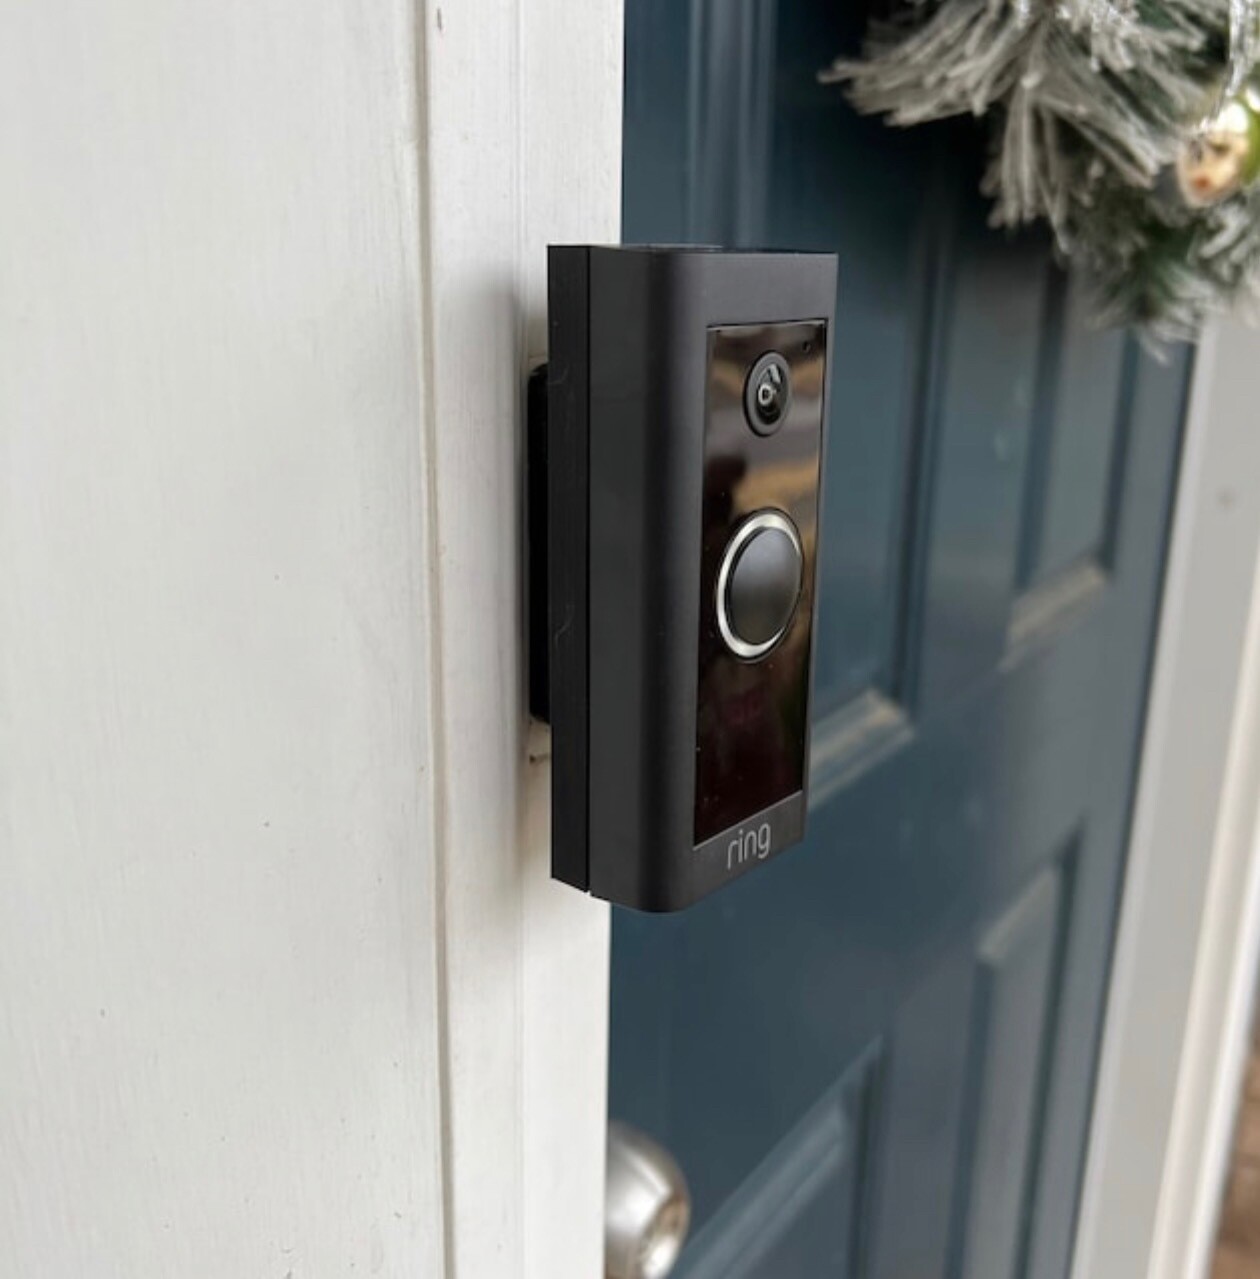 Ring Pro2 Doorbell Fixed Mount Slim INSTALL ANYWHERE Siding/ Trim- Fits exactly where old doorbell fit.- Angle Adjustment Available NO NEW HOLES